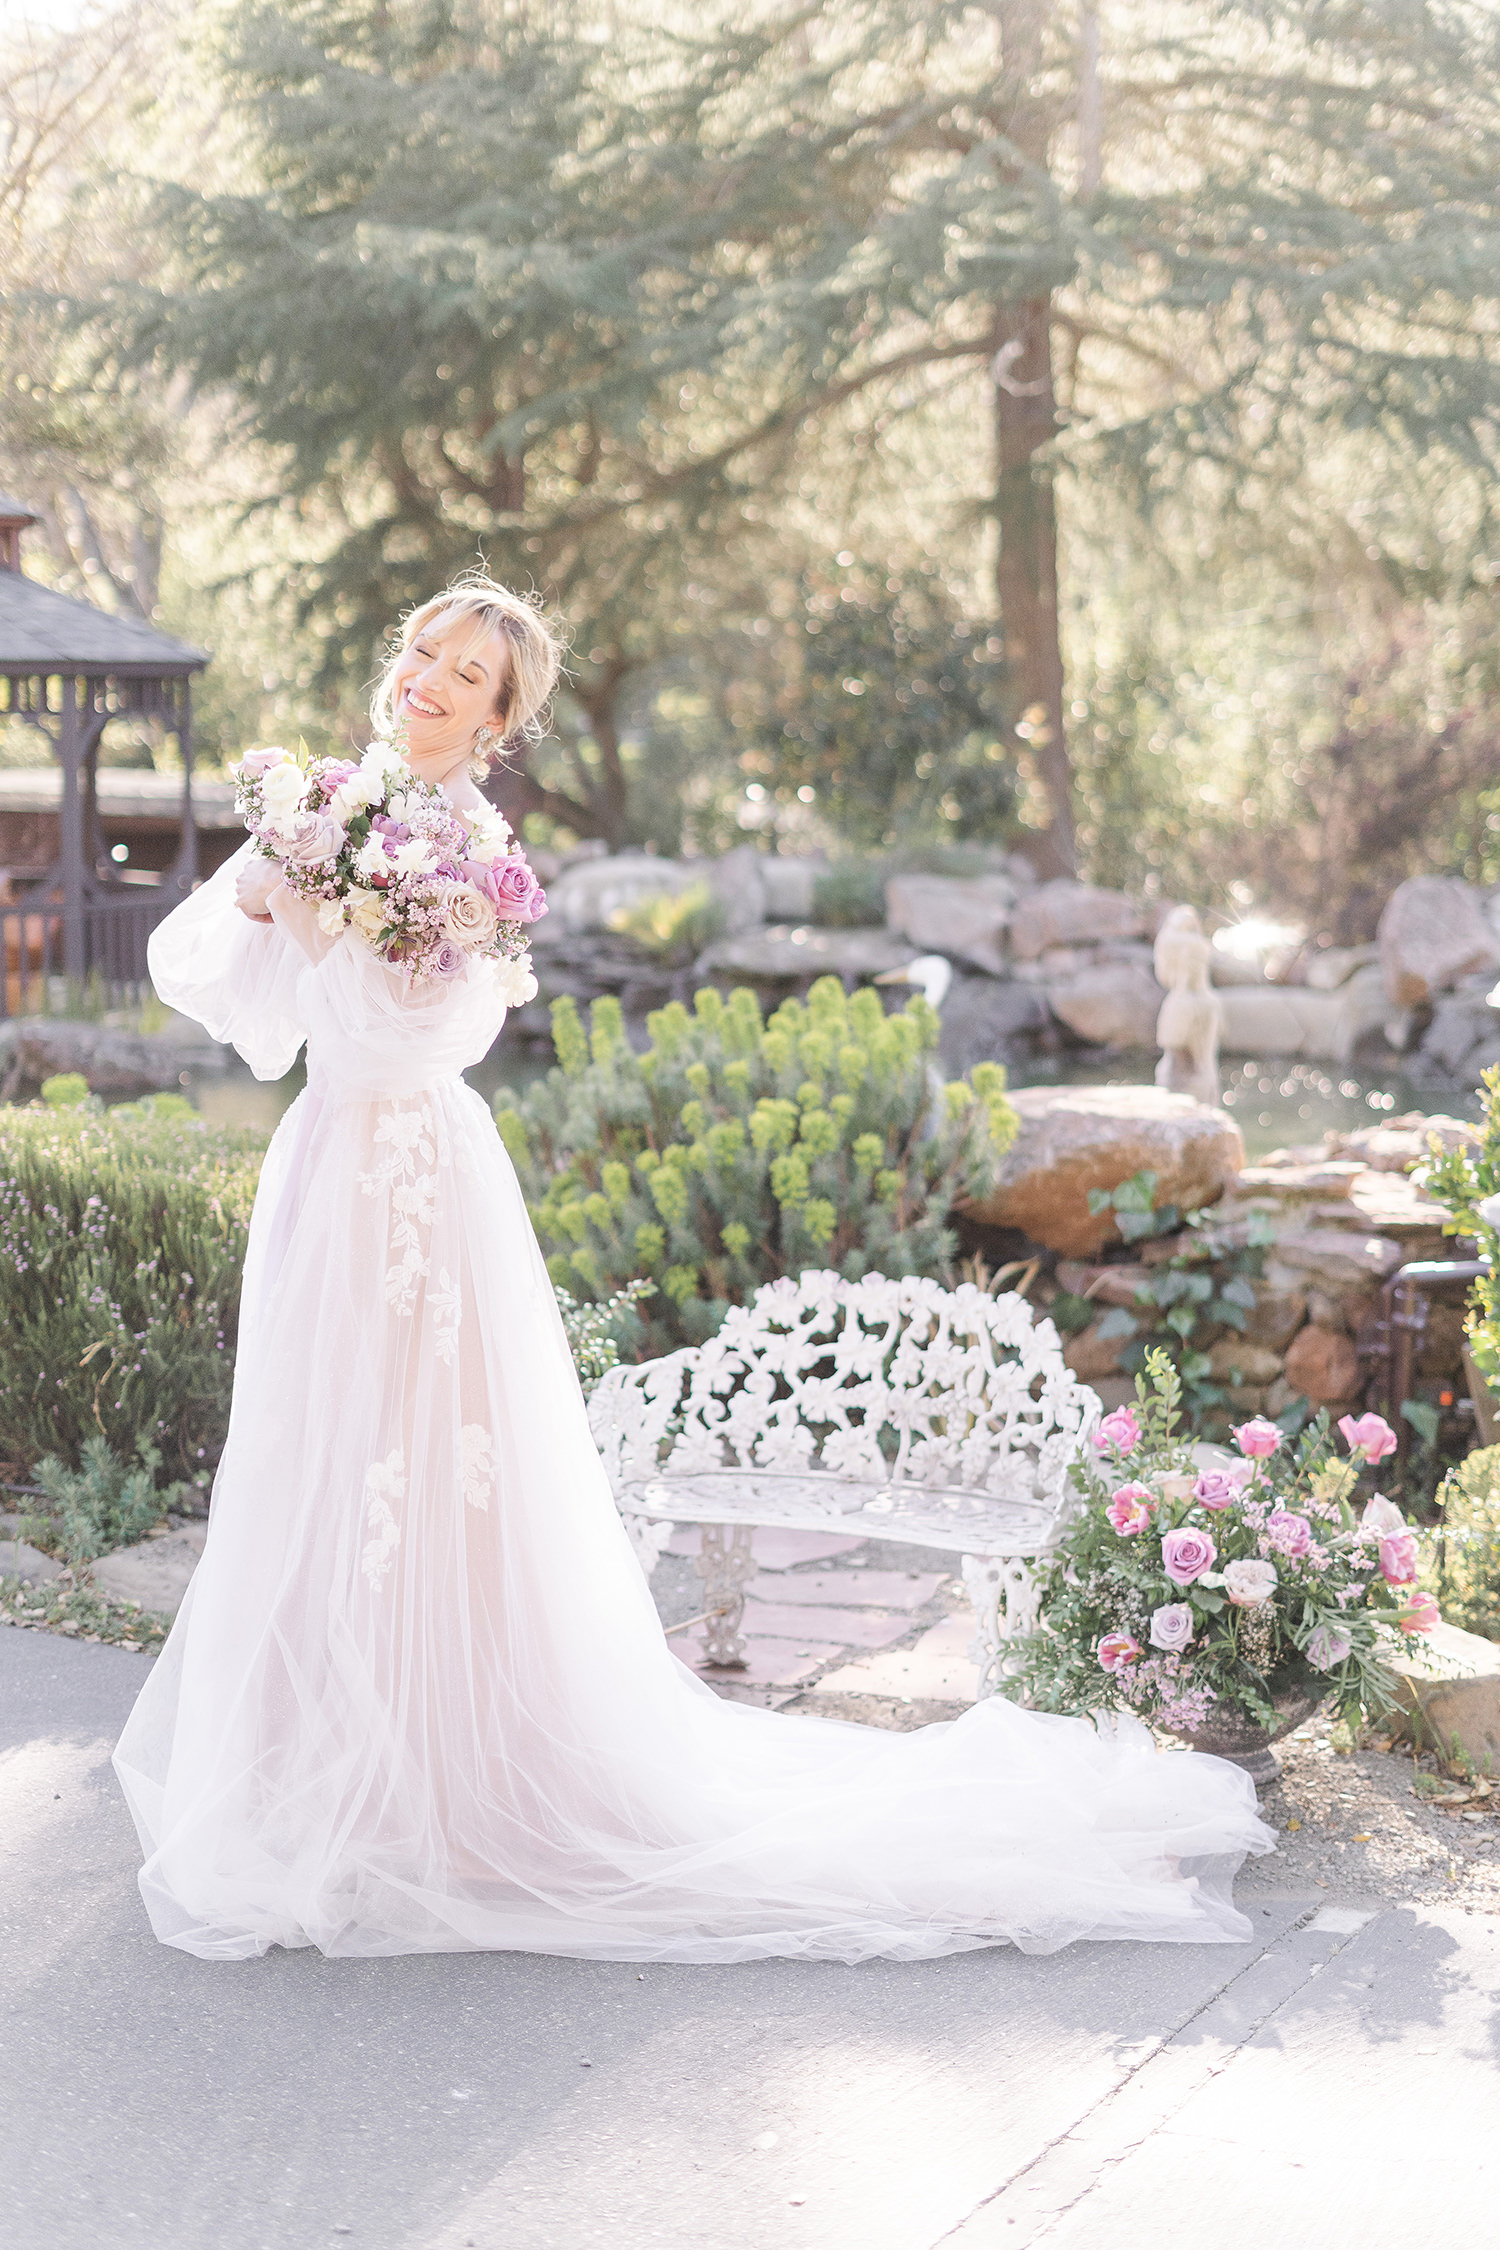 Wedding Day Bridal Portraits by Adrienne and Dani Photography